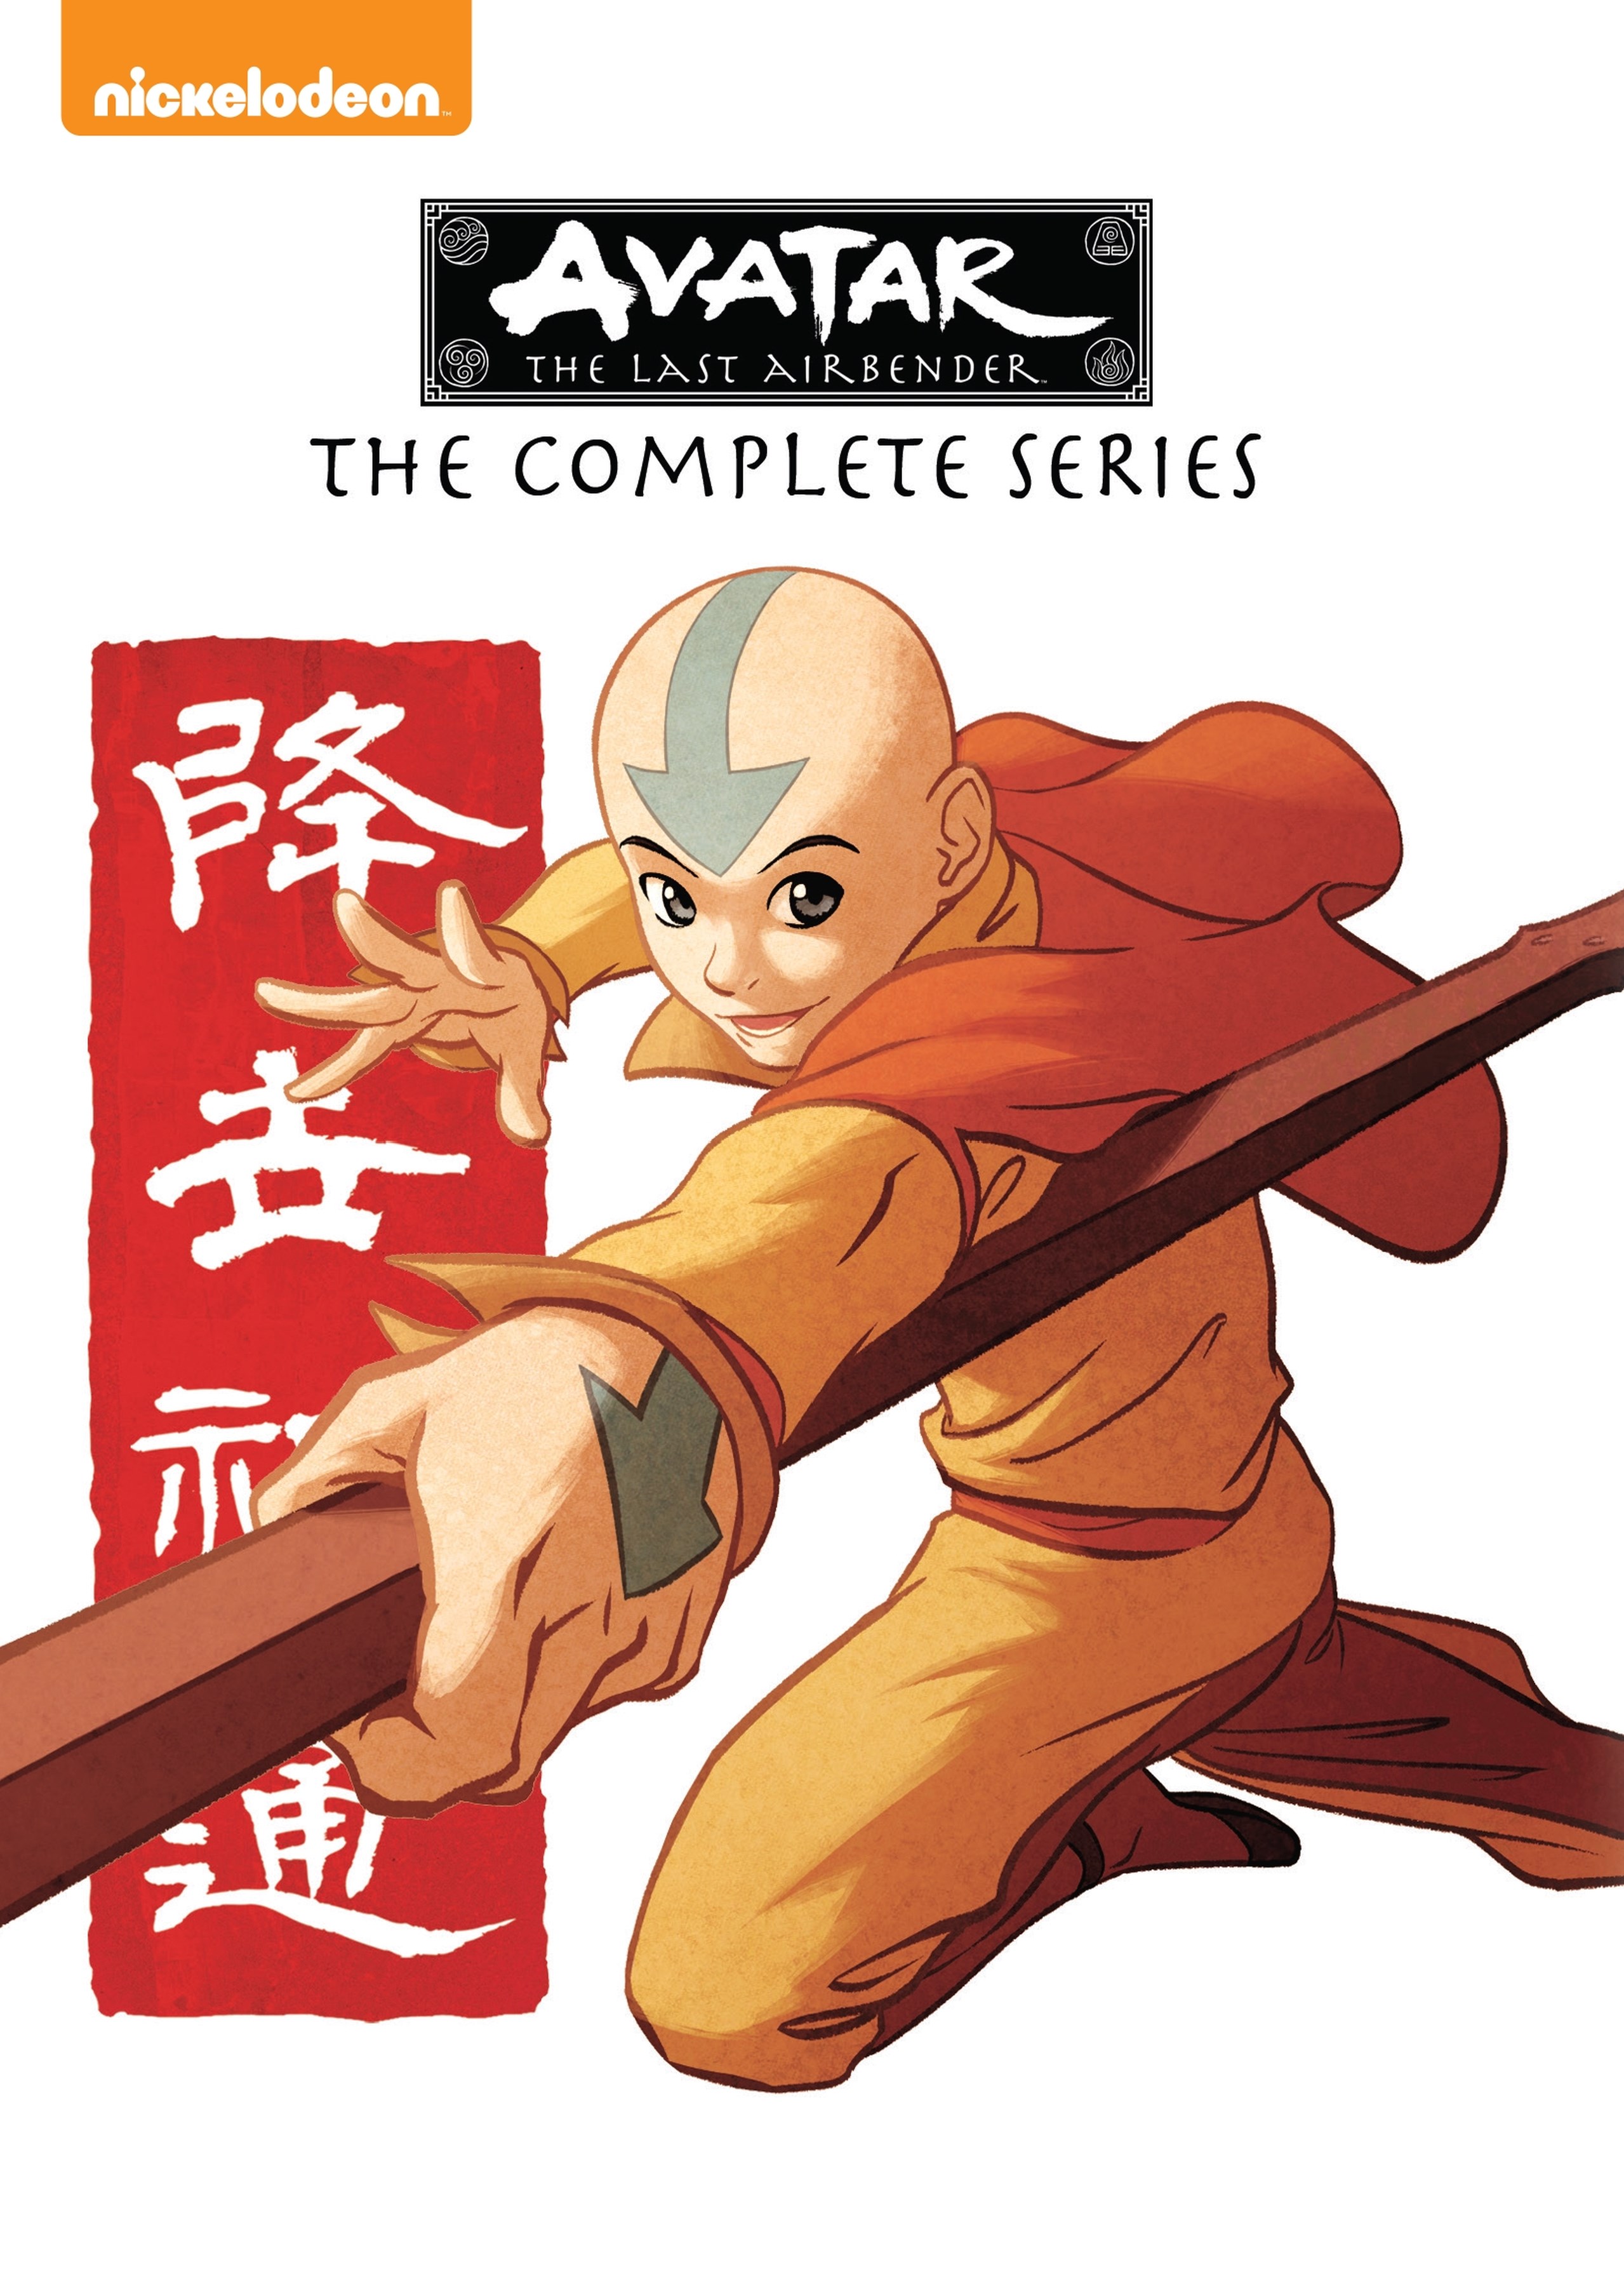 Avatar: The Last Airbender - The Complete Series [DVD]